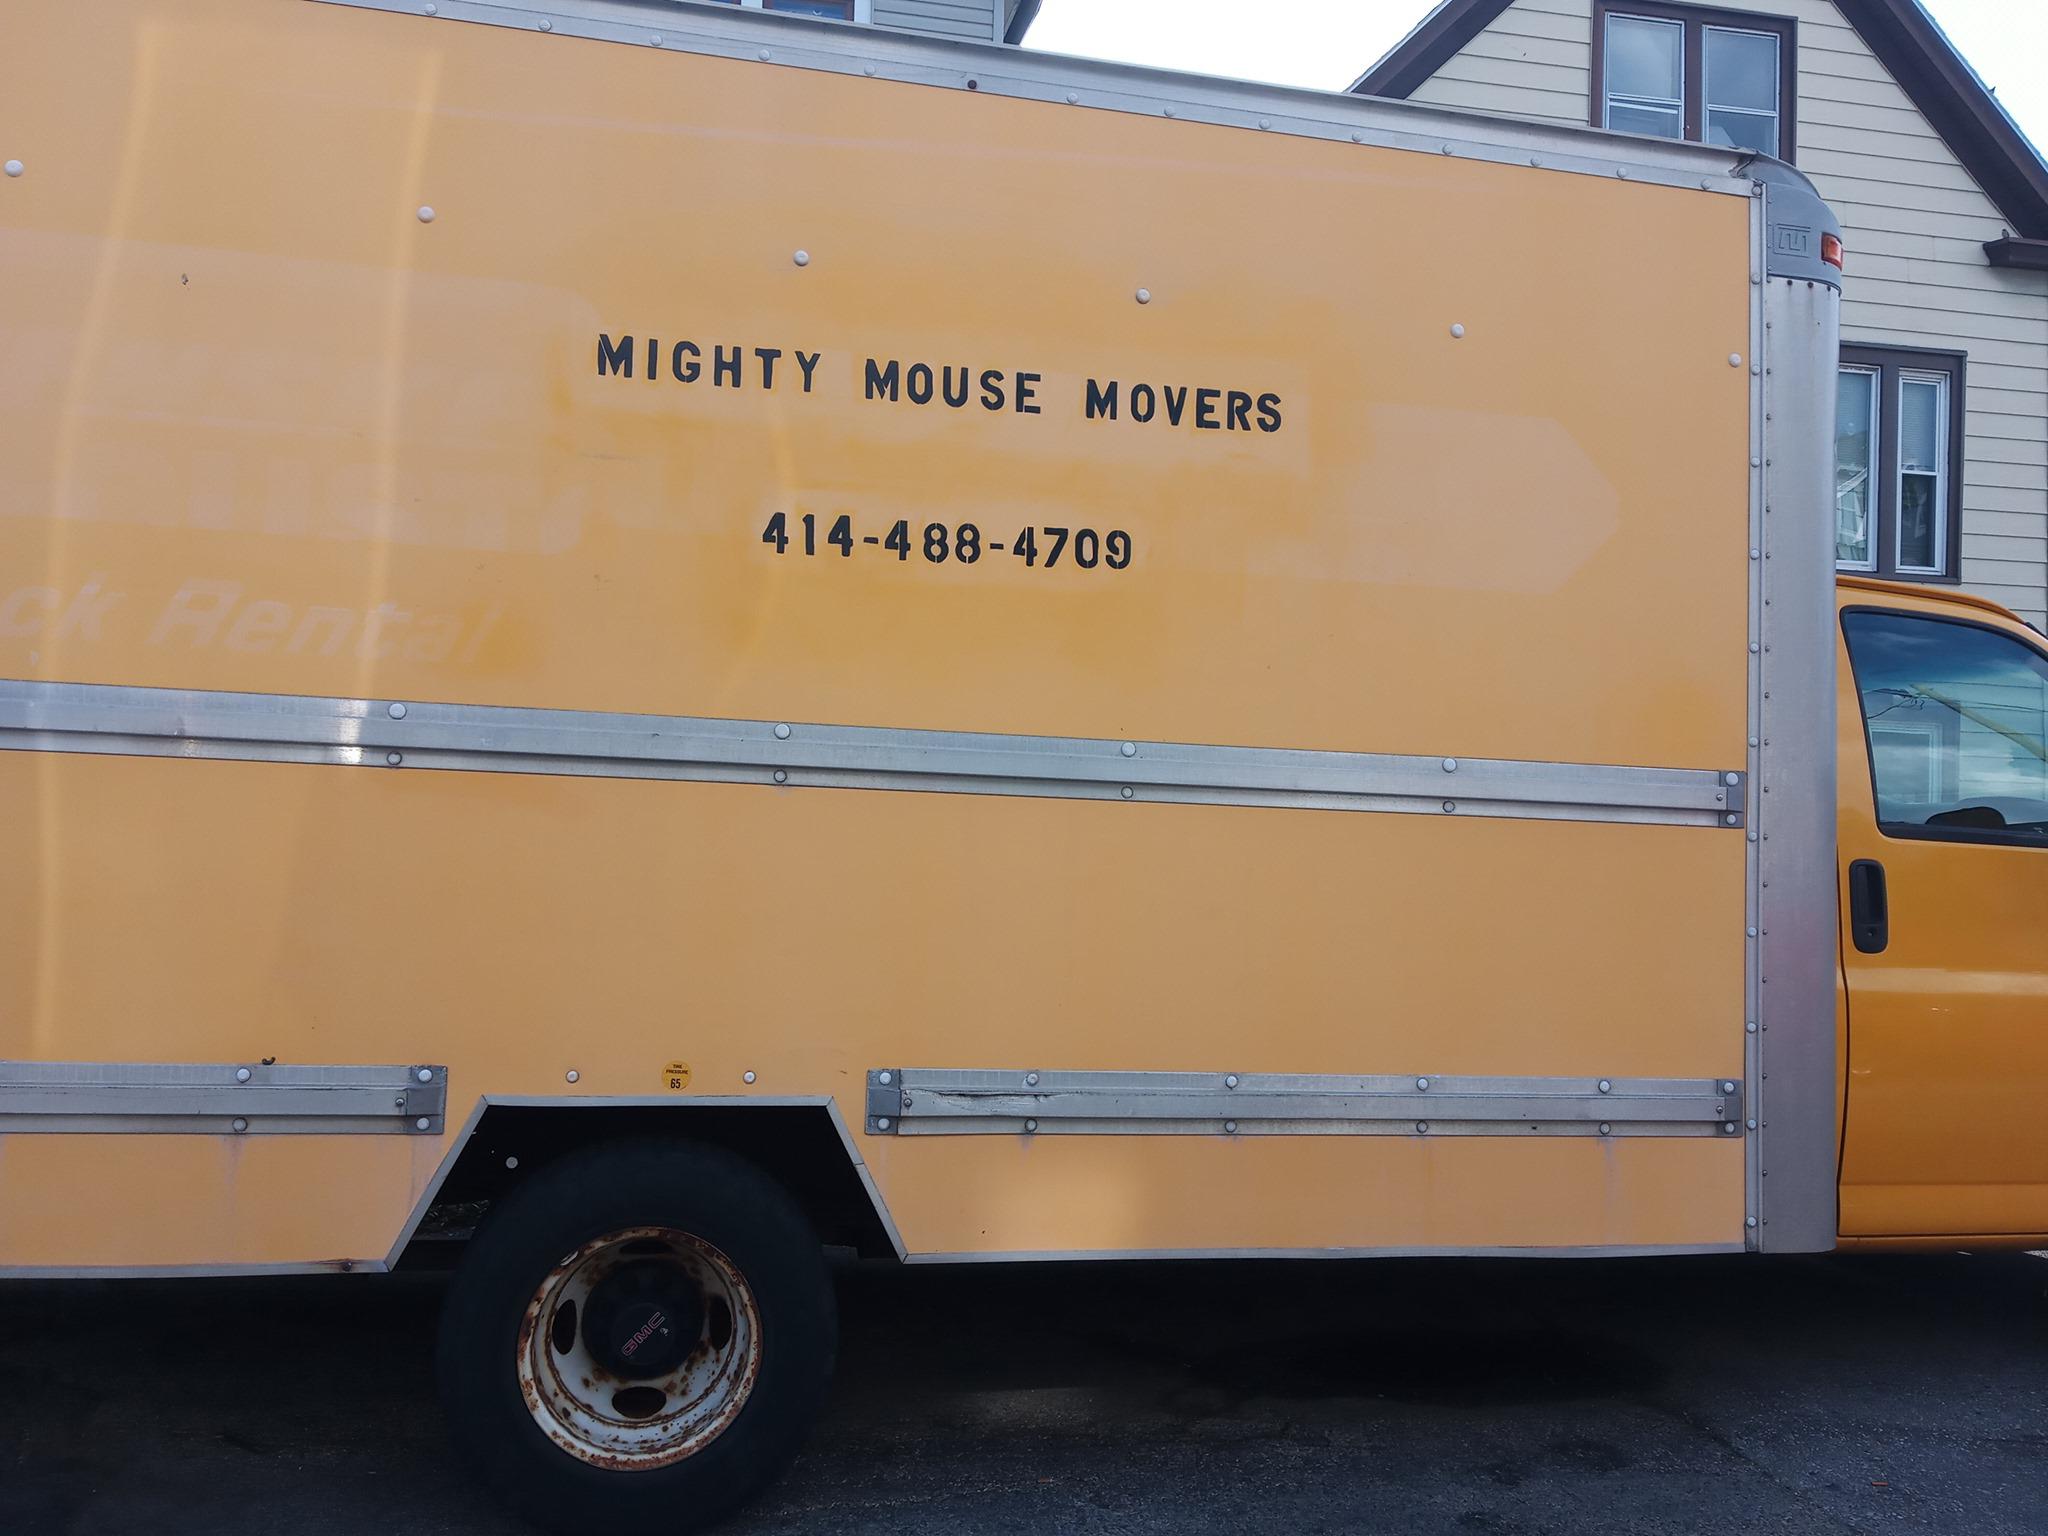 Mighty Mouse Movers MKE LLC